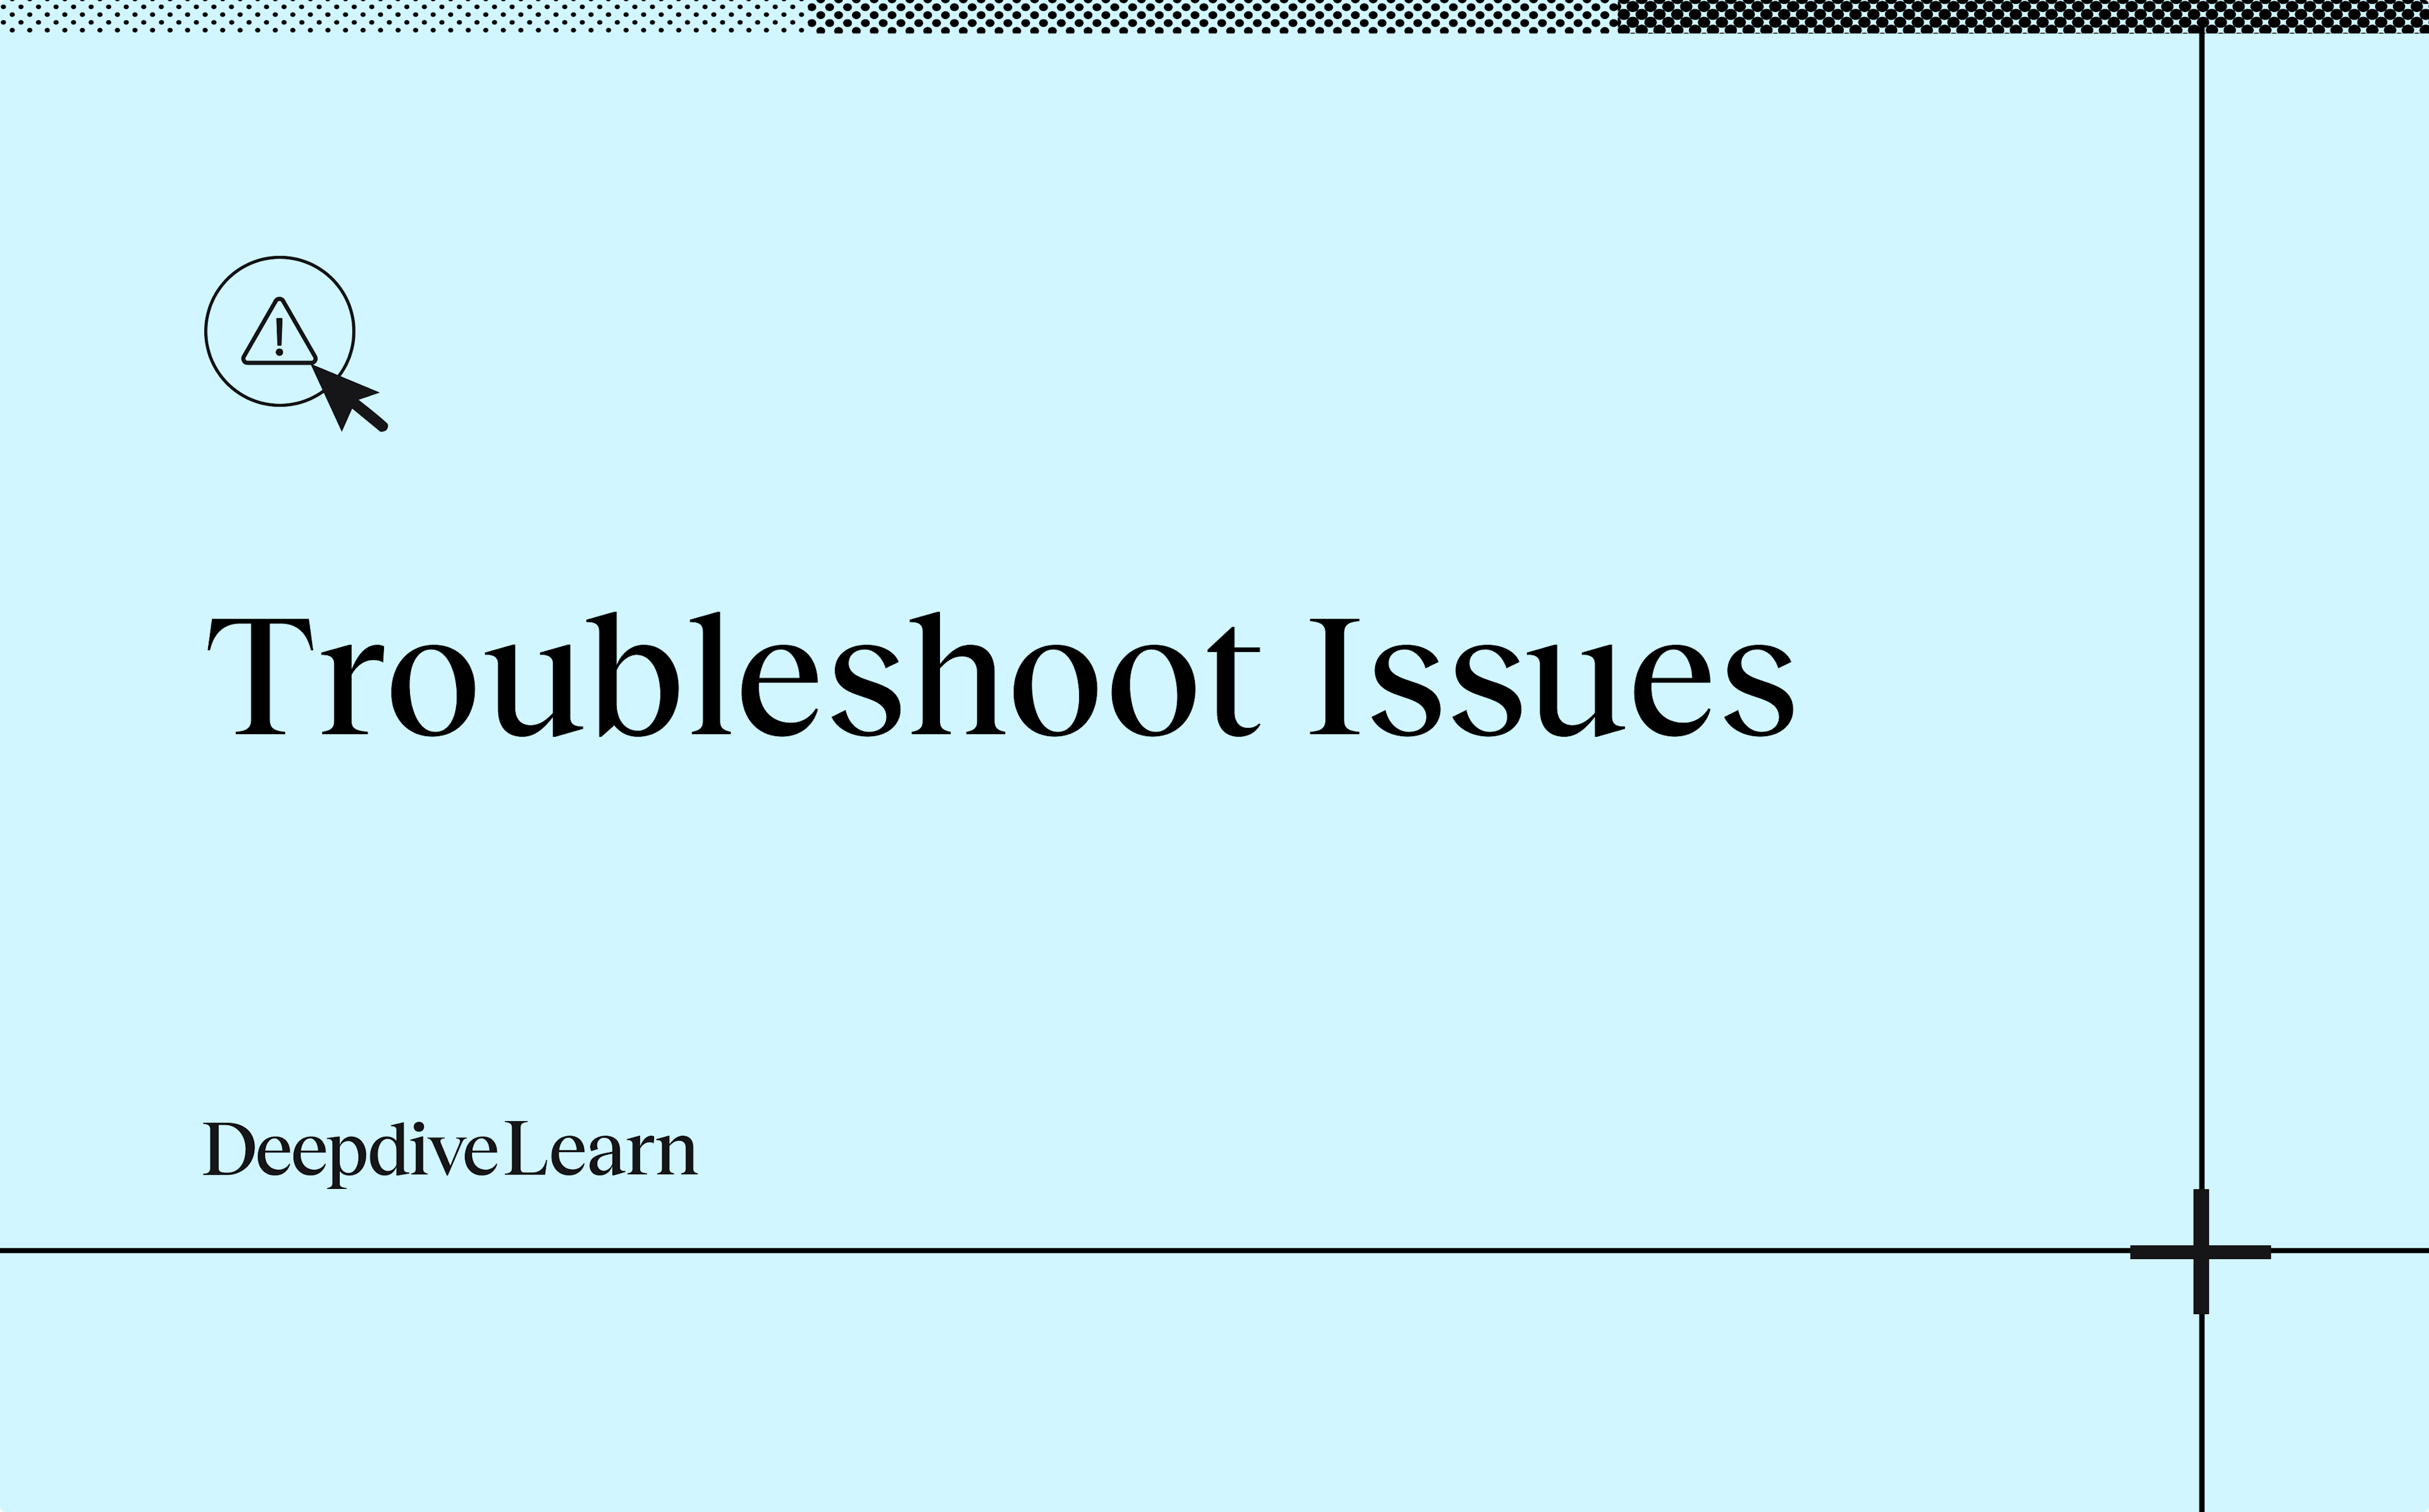 Troubleshoot issues by Deepdive Learn